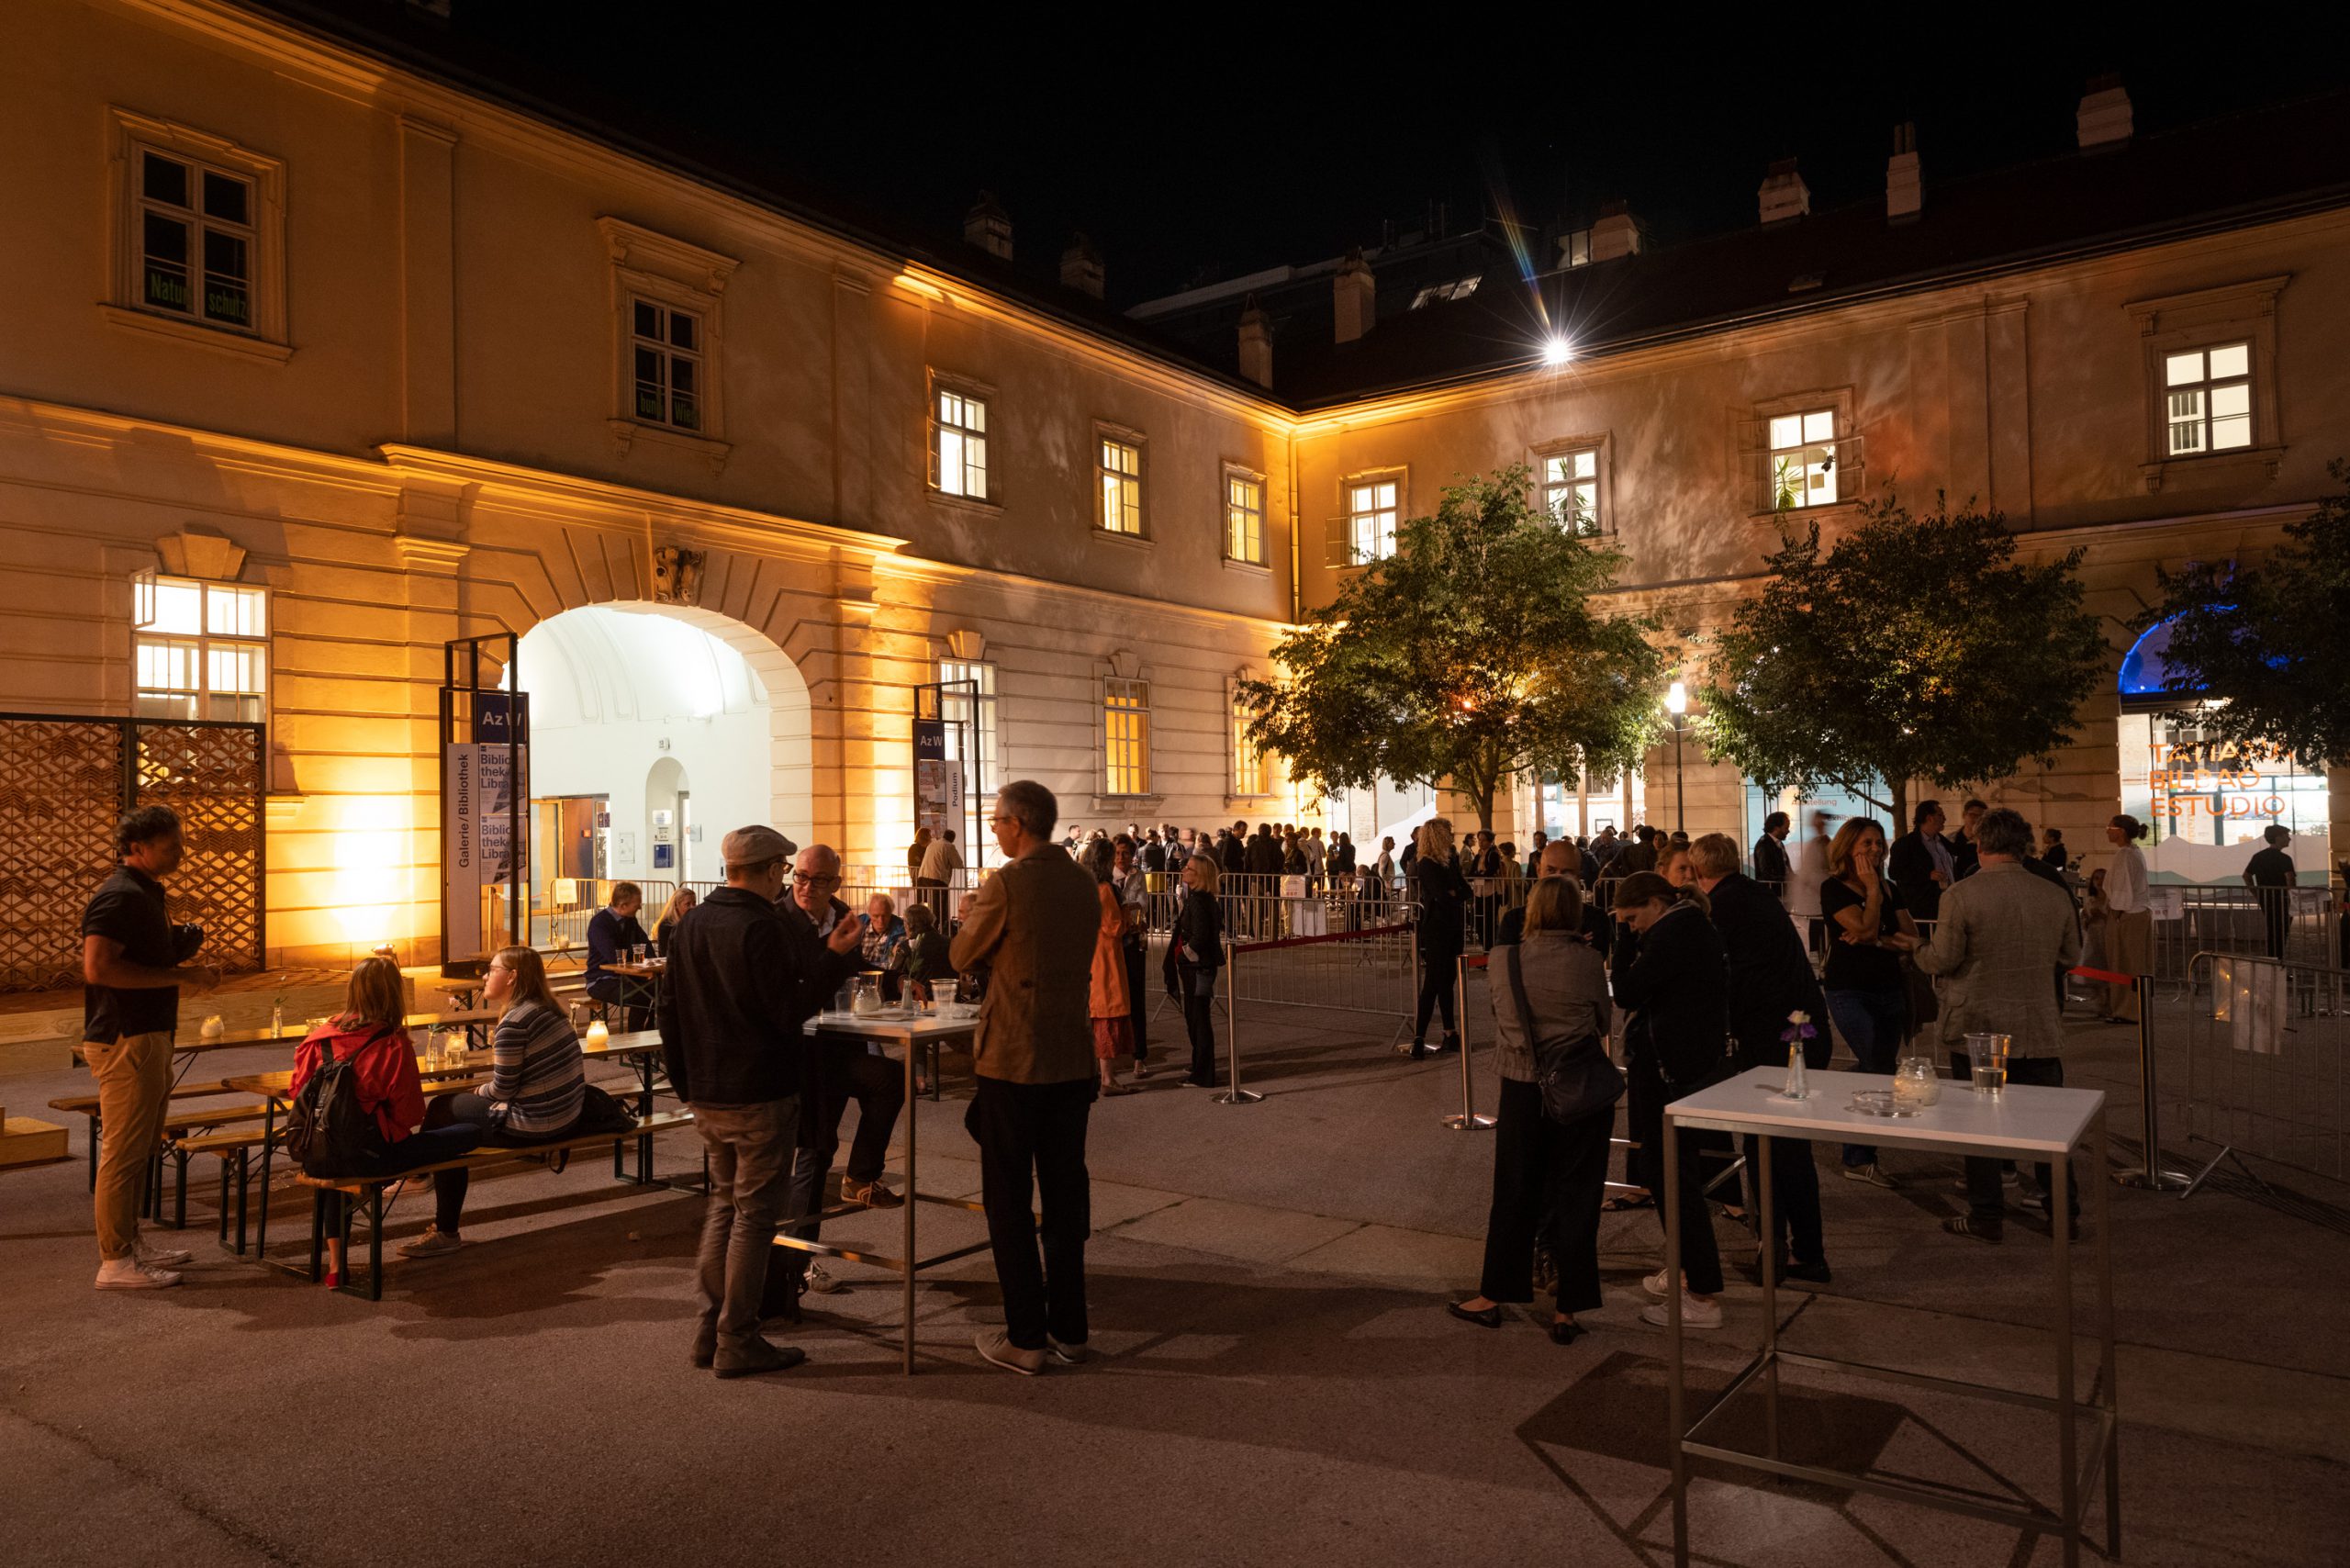 many people in the evening at a party in a courtyard